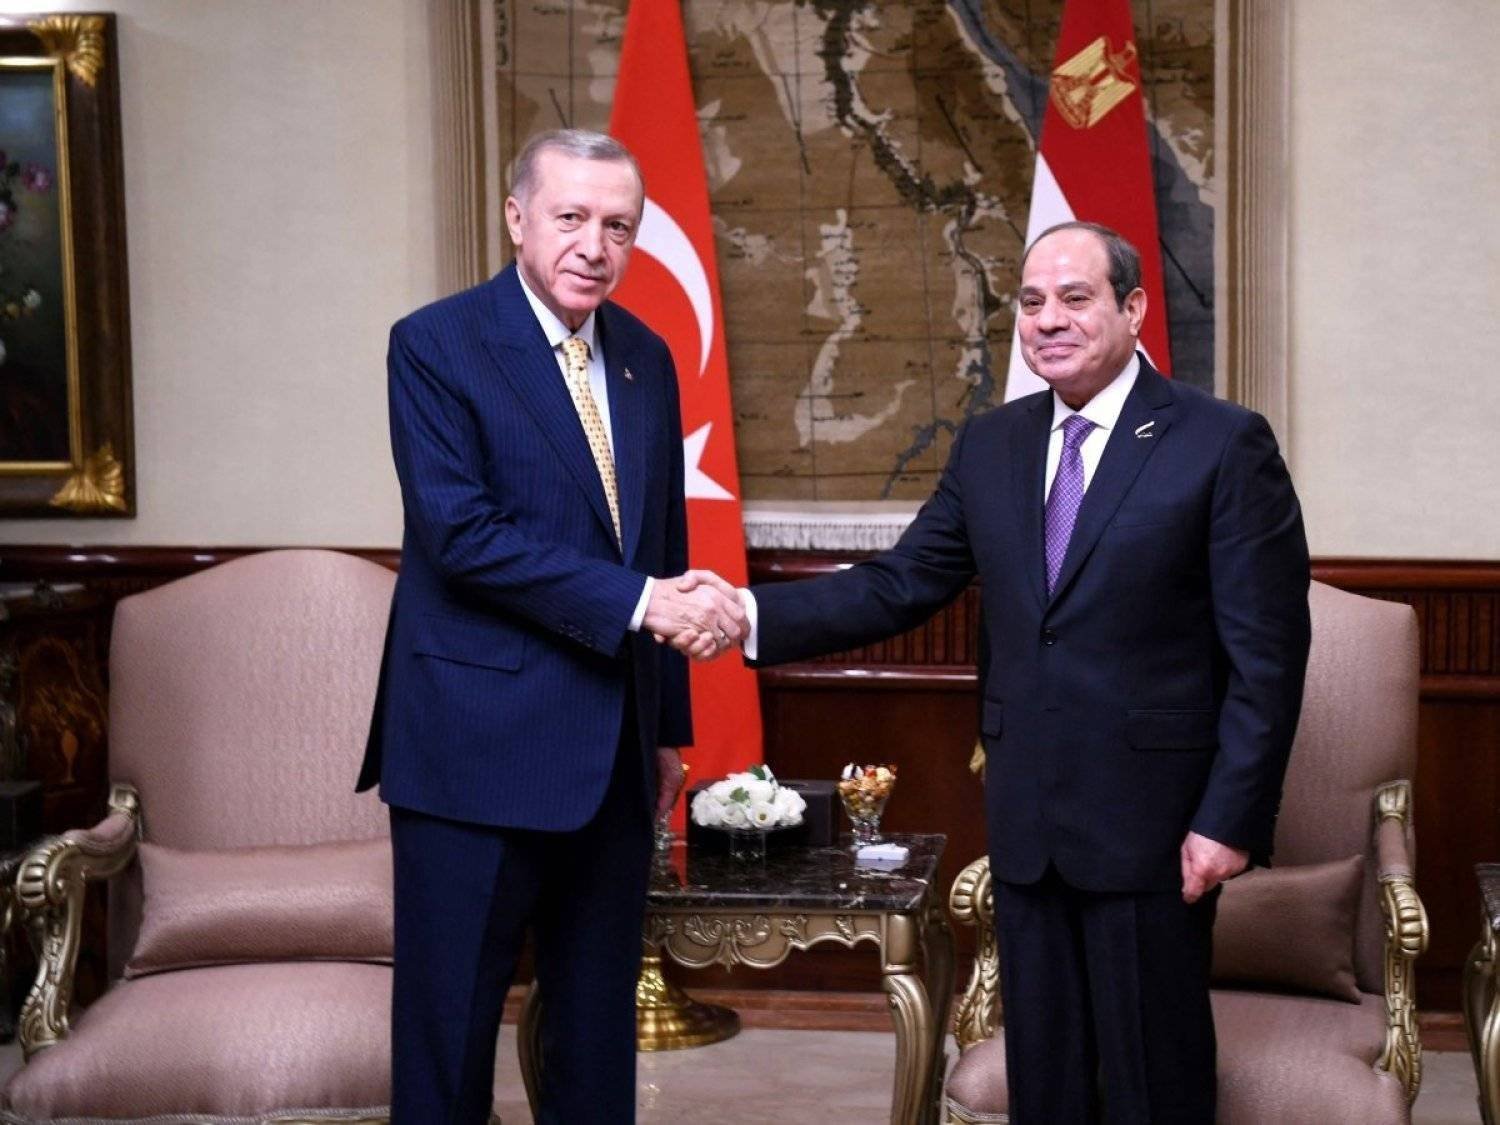 The Egyptian president shakes hands with his Turkish counterpart during his visit to Cairo last February (AFP)